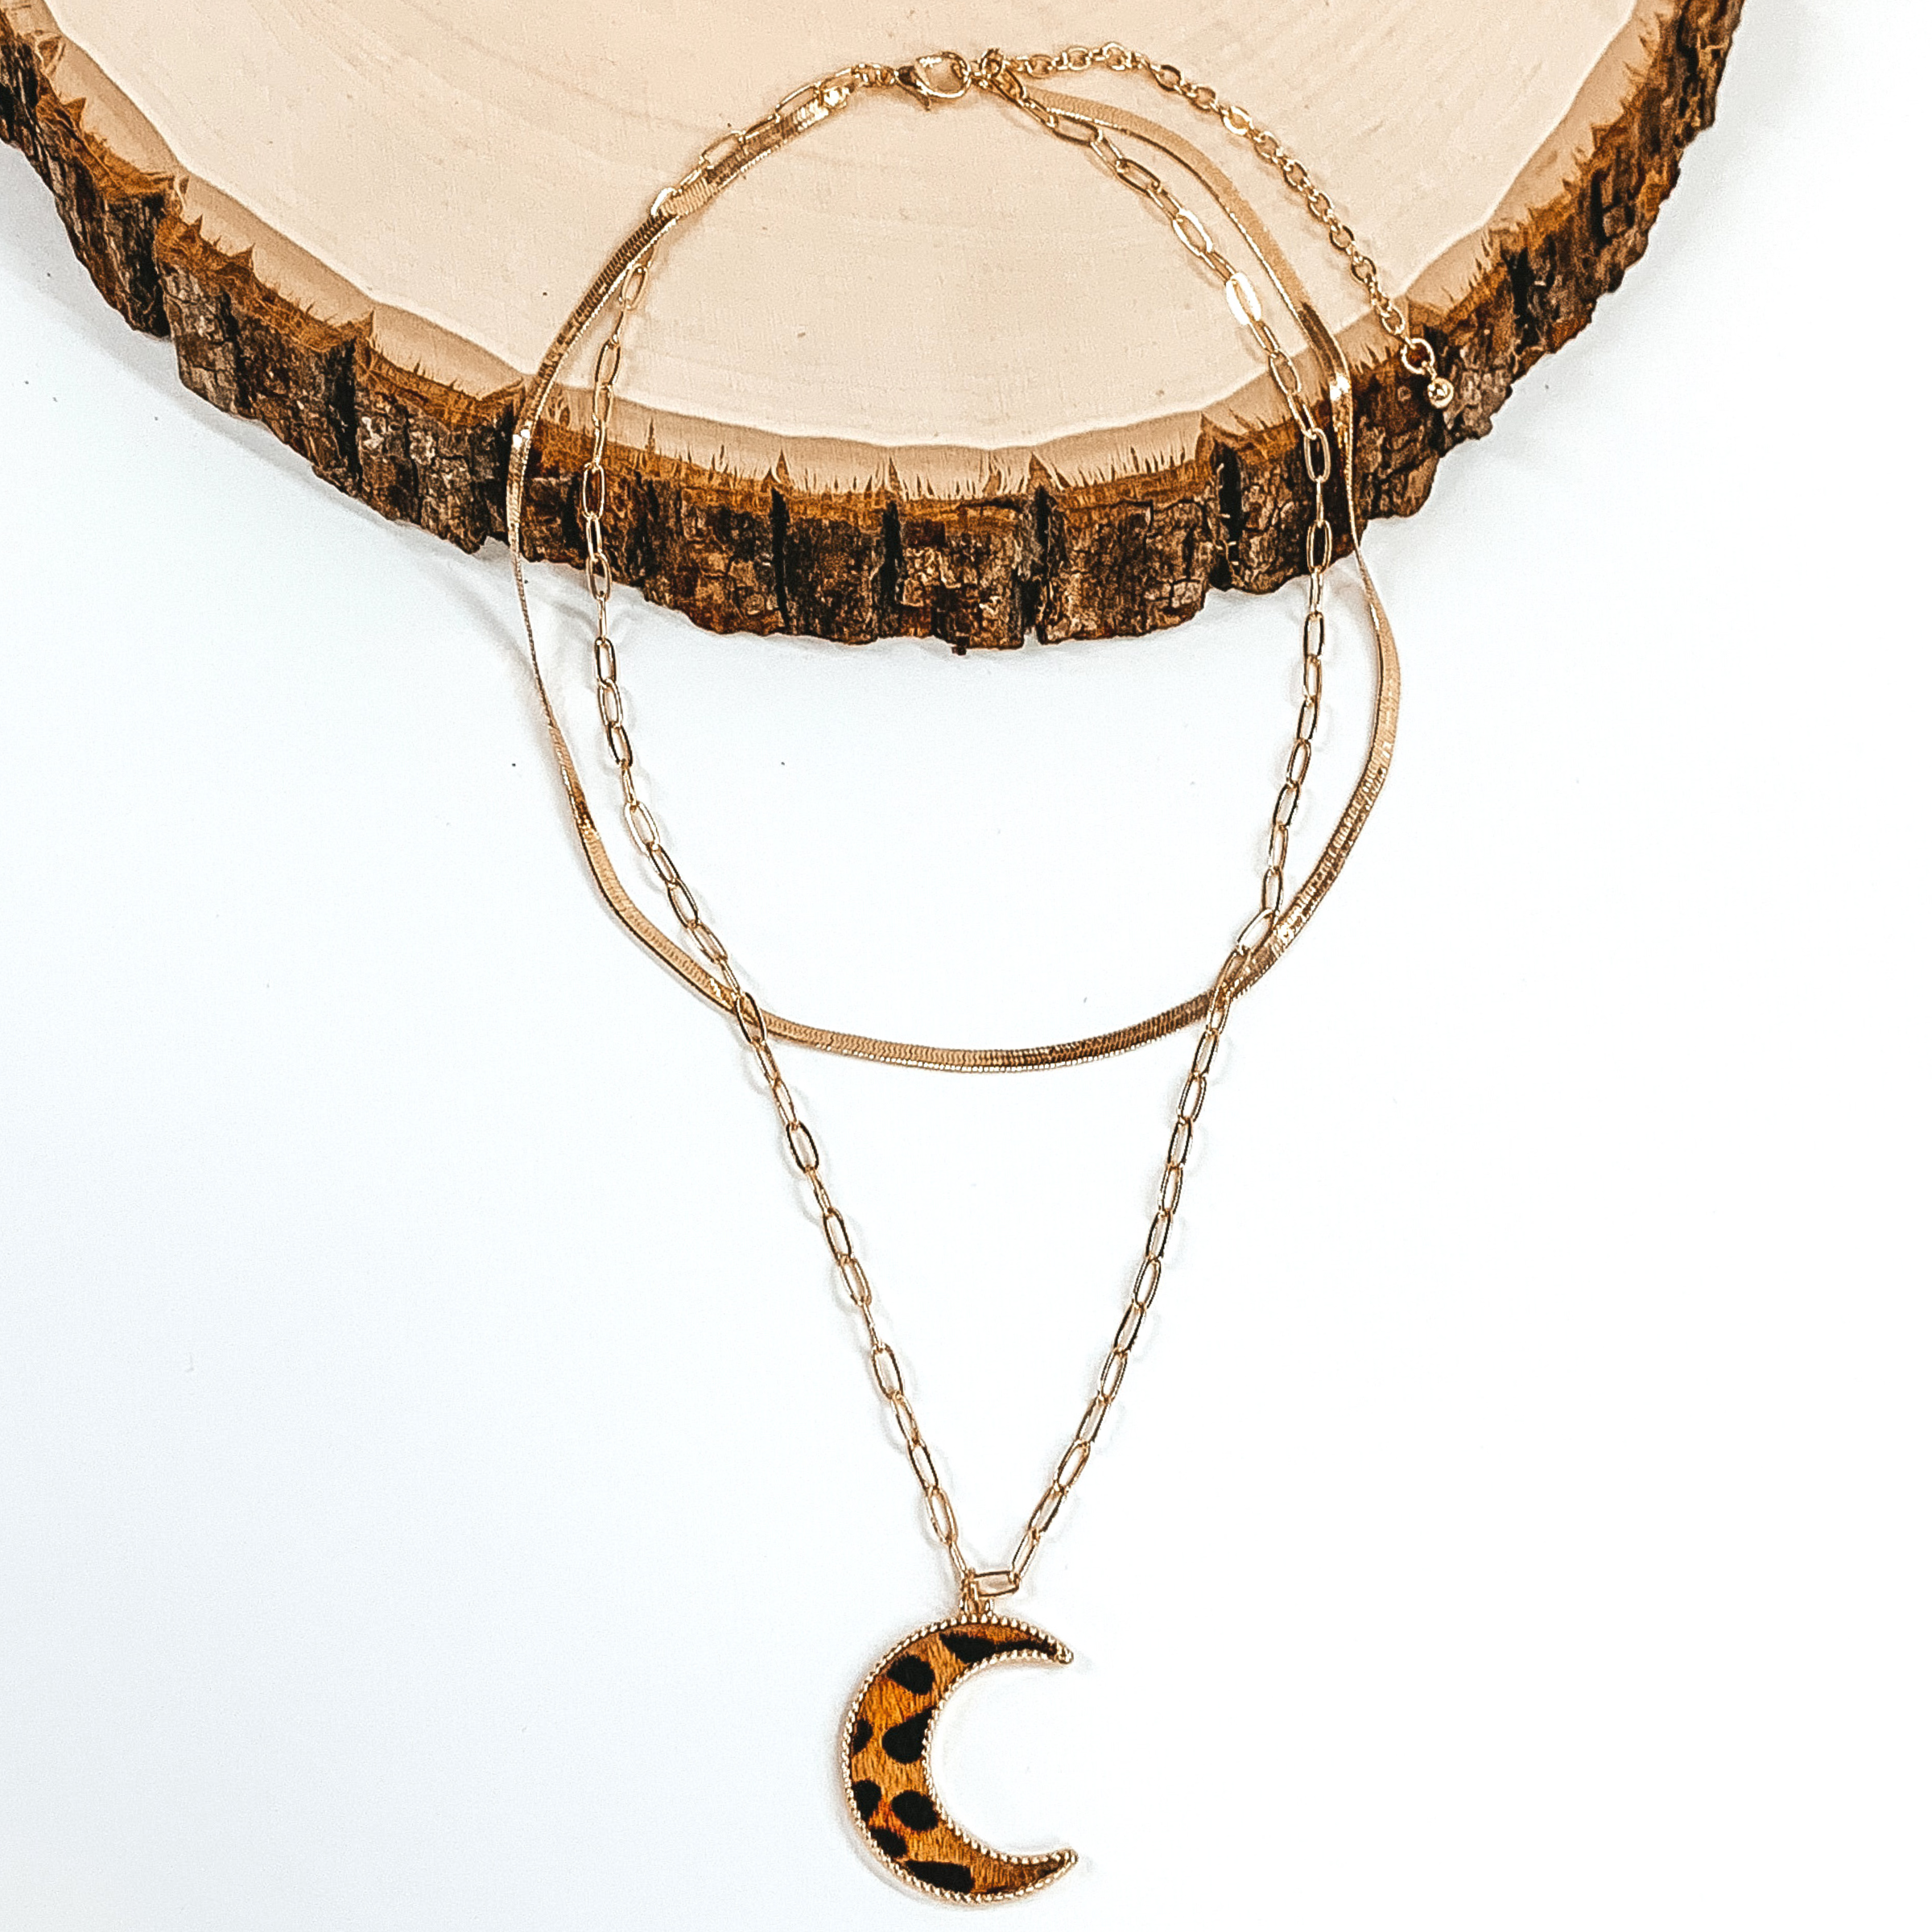 Gold paperclip doubled chain with a moon pendant. The pendant has a brown hide inlay with an animal print. This necklace is pictured laying on a piece of wood on a white background.